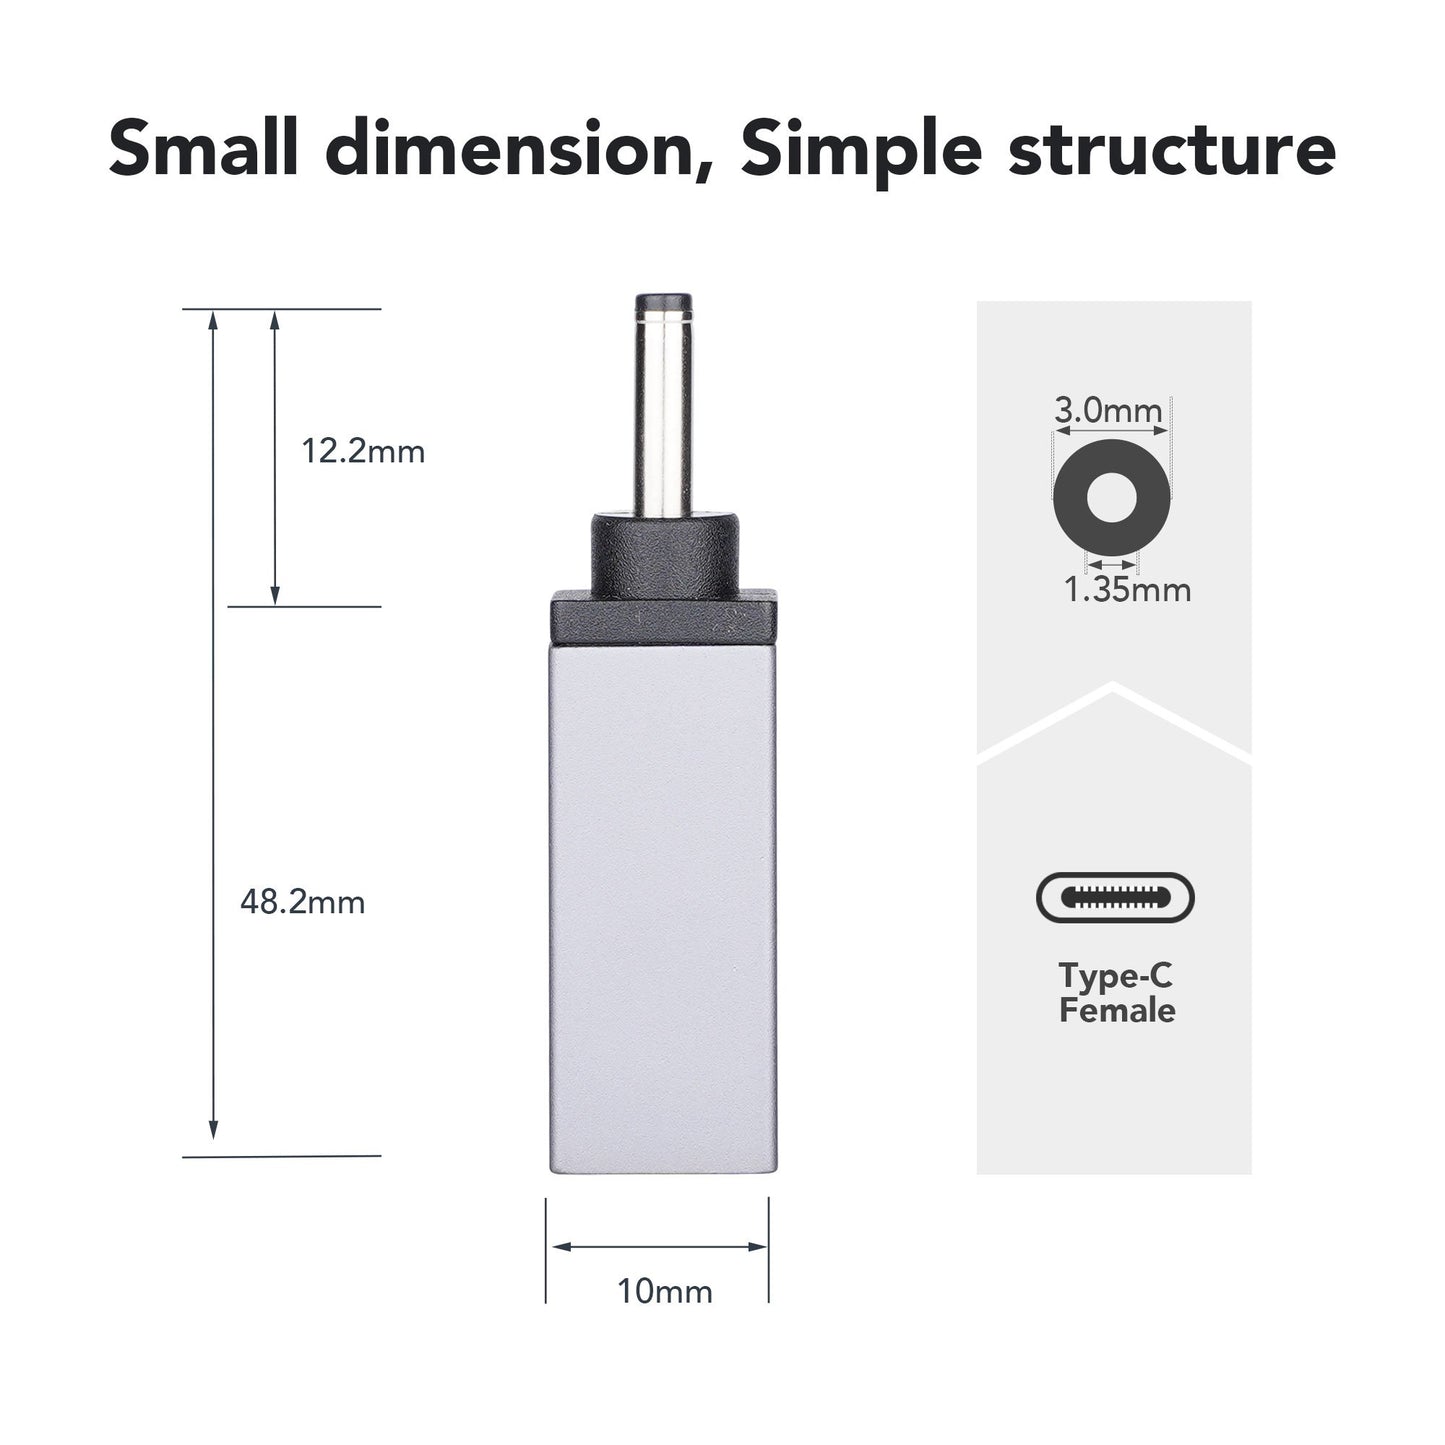 USB-C to DC Adapter Tip L 3.0x1.1mm